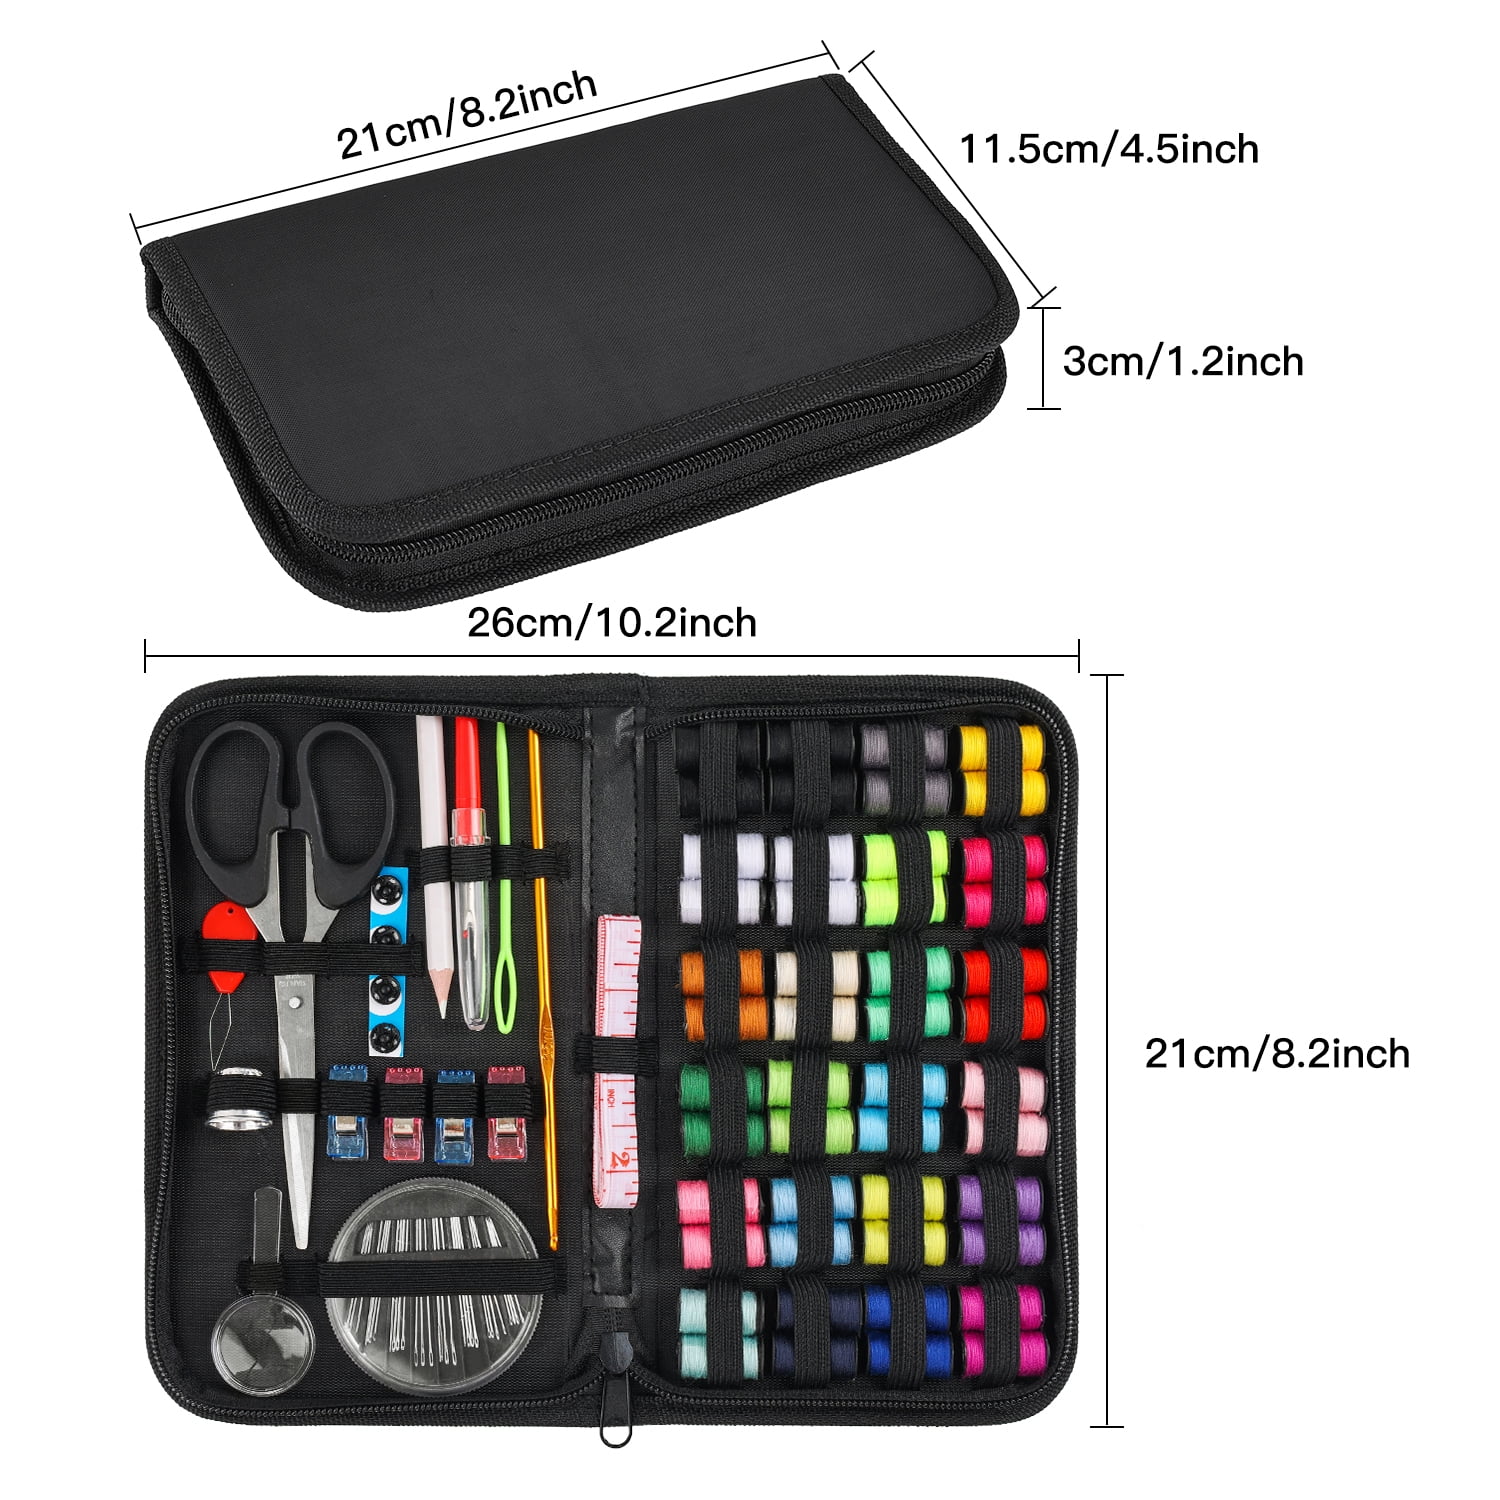 Multicolored Sewing Kit with Spools, Needles and Extra Sewing Supplies - On  Sale - Bed Bath & Beyond - 37105668